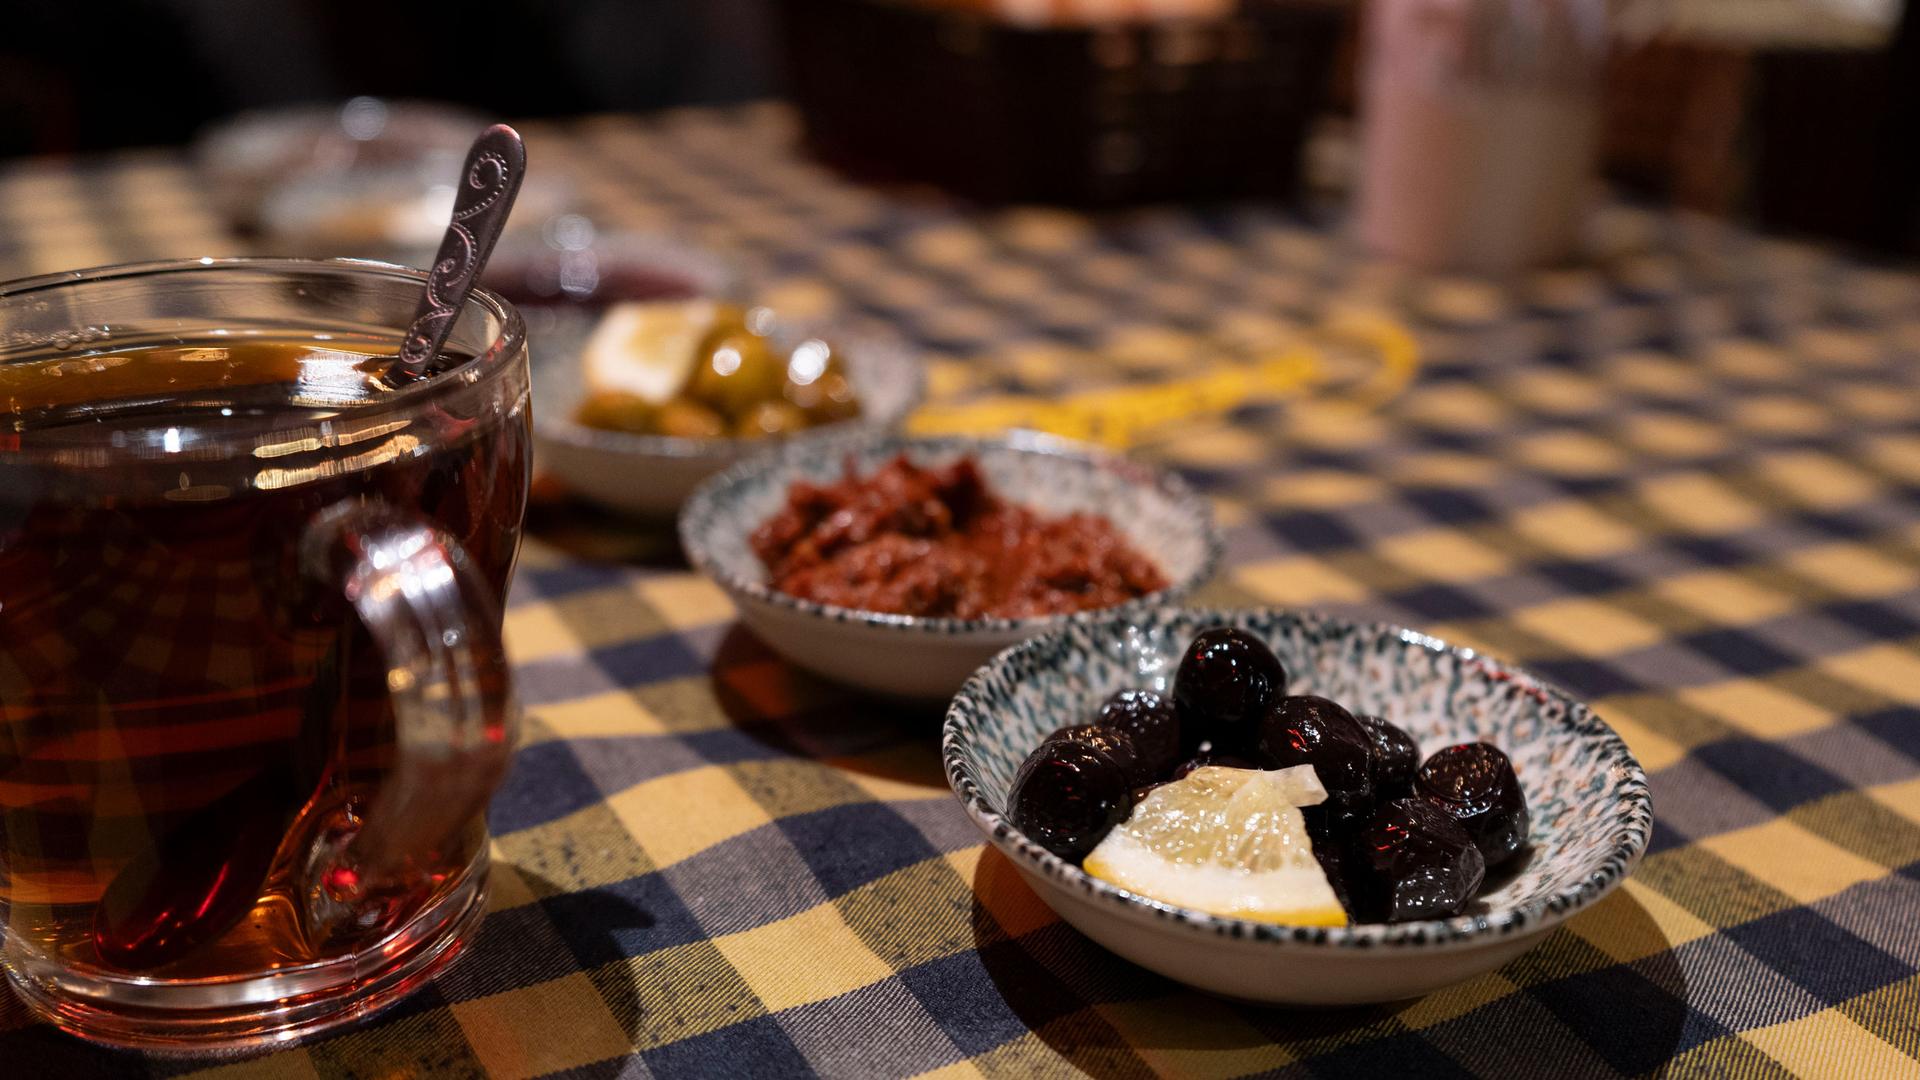 Turkish breakfasts are elaborate and offer a wide variety of options eaten over the course of an hour or two. Diners are not expected to eat everything on the table. 